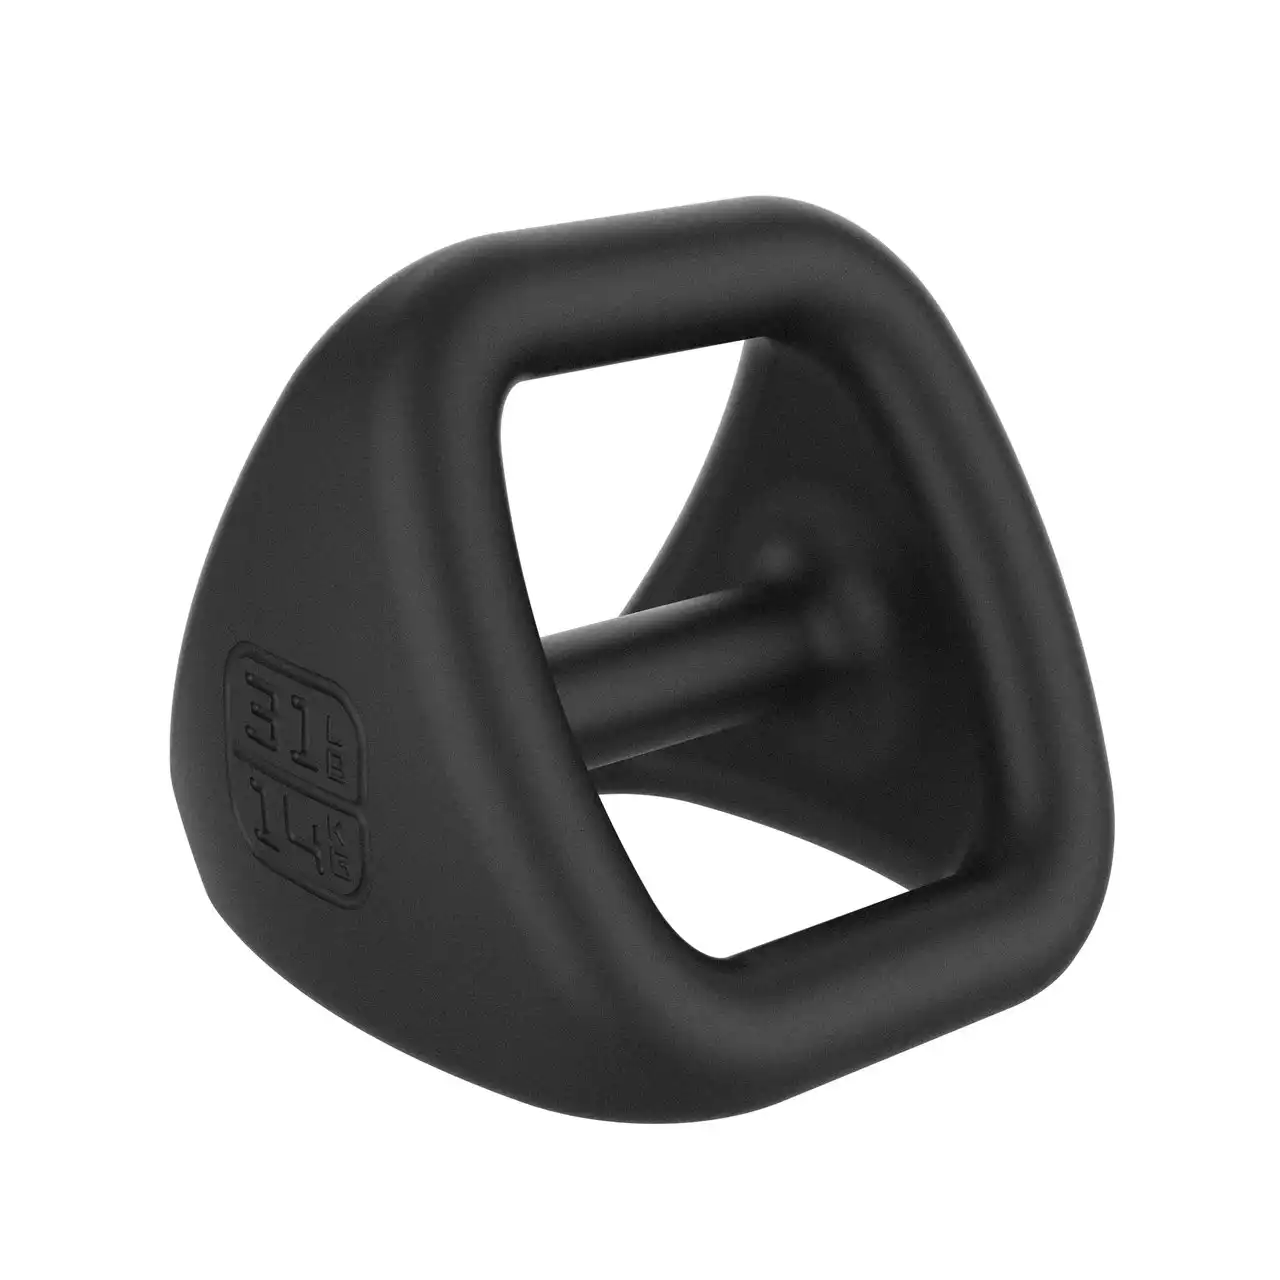 YBell Pro 4-in-1 Kettlebell/Dumbbell/Med Ball/Push Up Stand 14kg Workout Weights